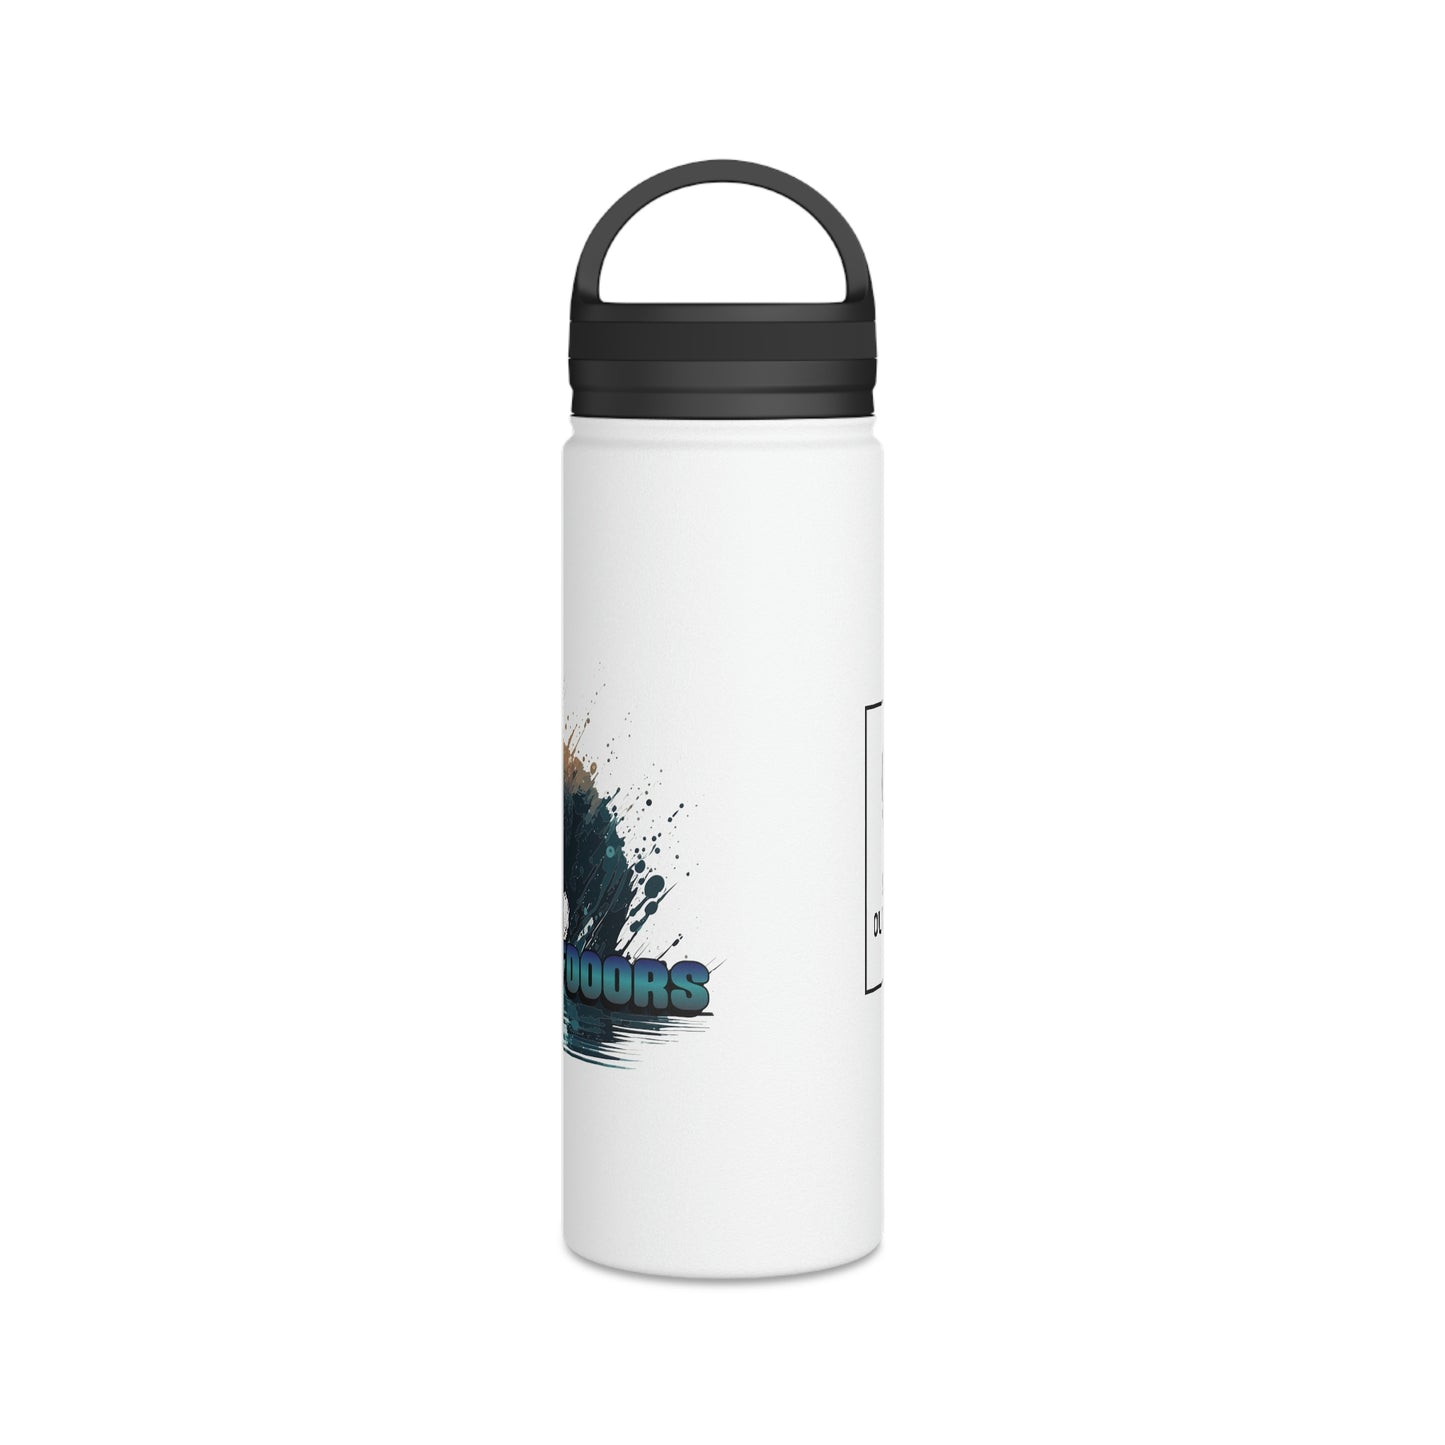 River Bear Stainless Steel Water Bottle, Handle Lid - 907Outdoors